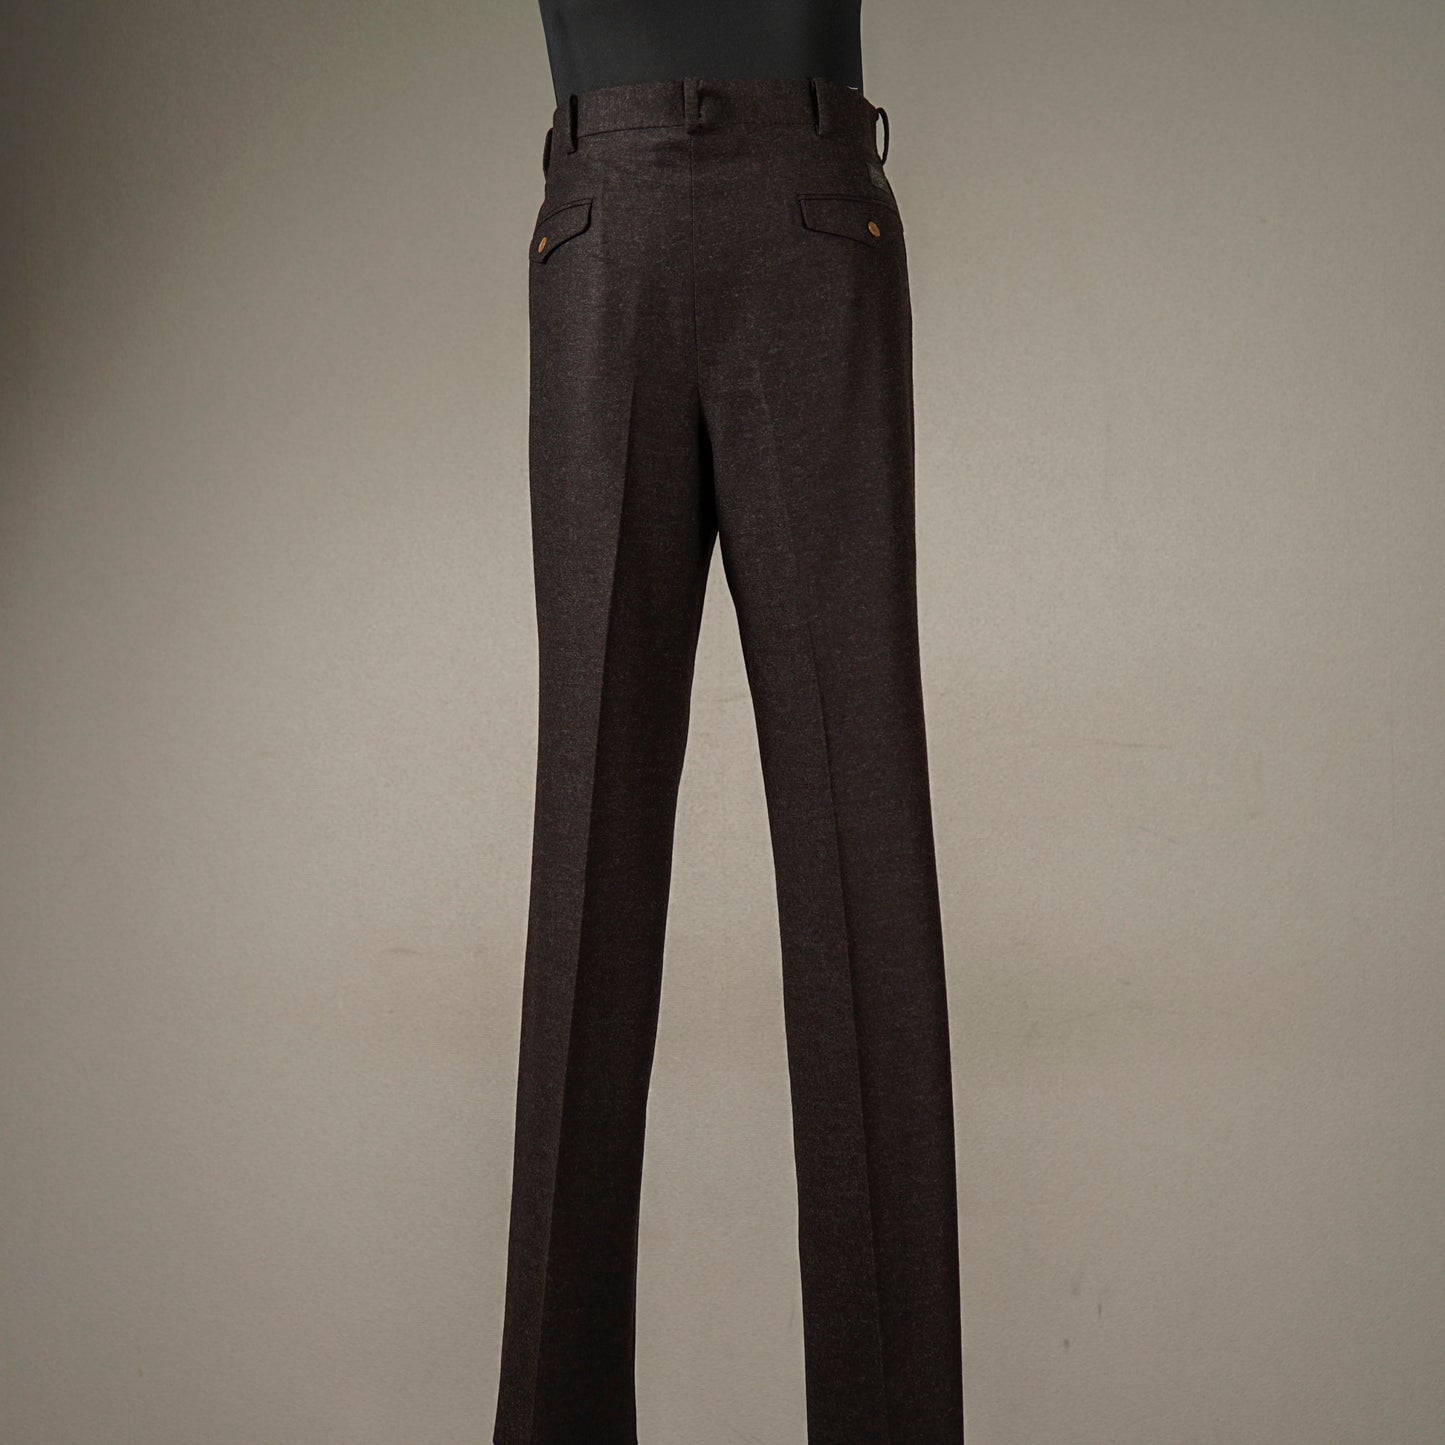 JAUNTY JALOPIES - STOMP FIT TROUSERS / 23-AW